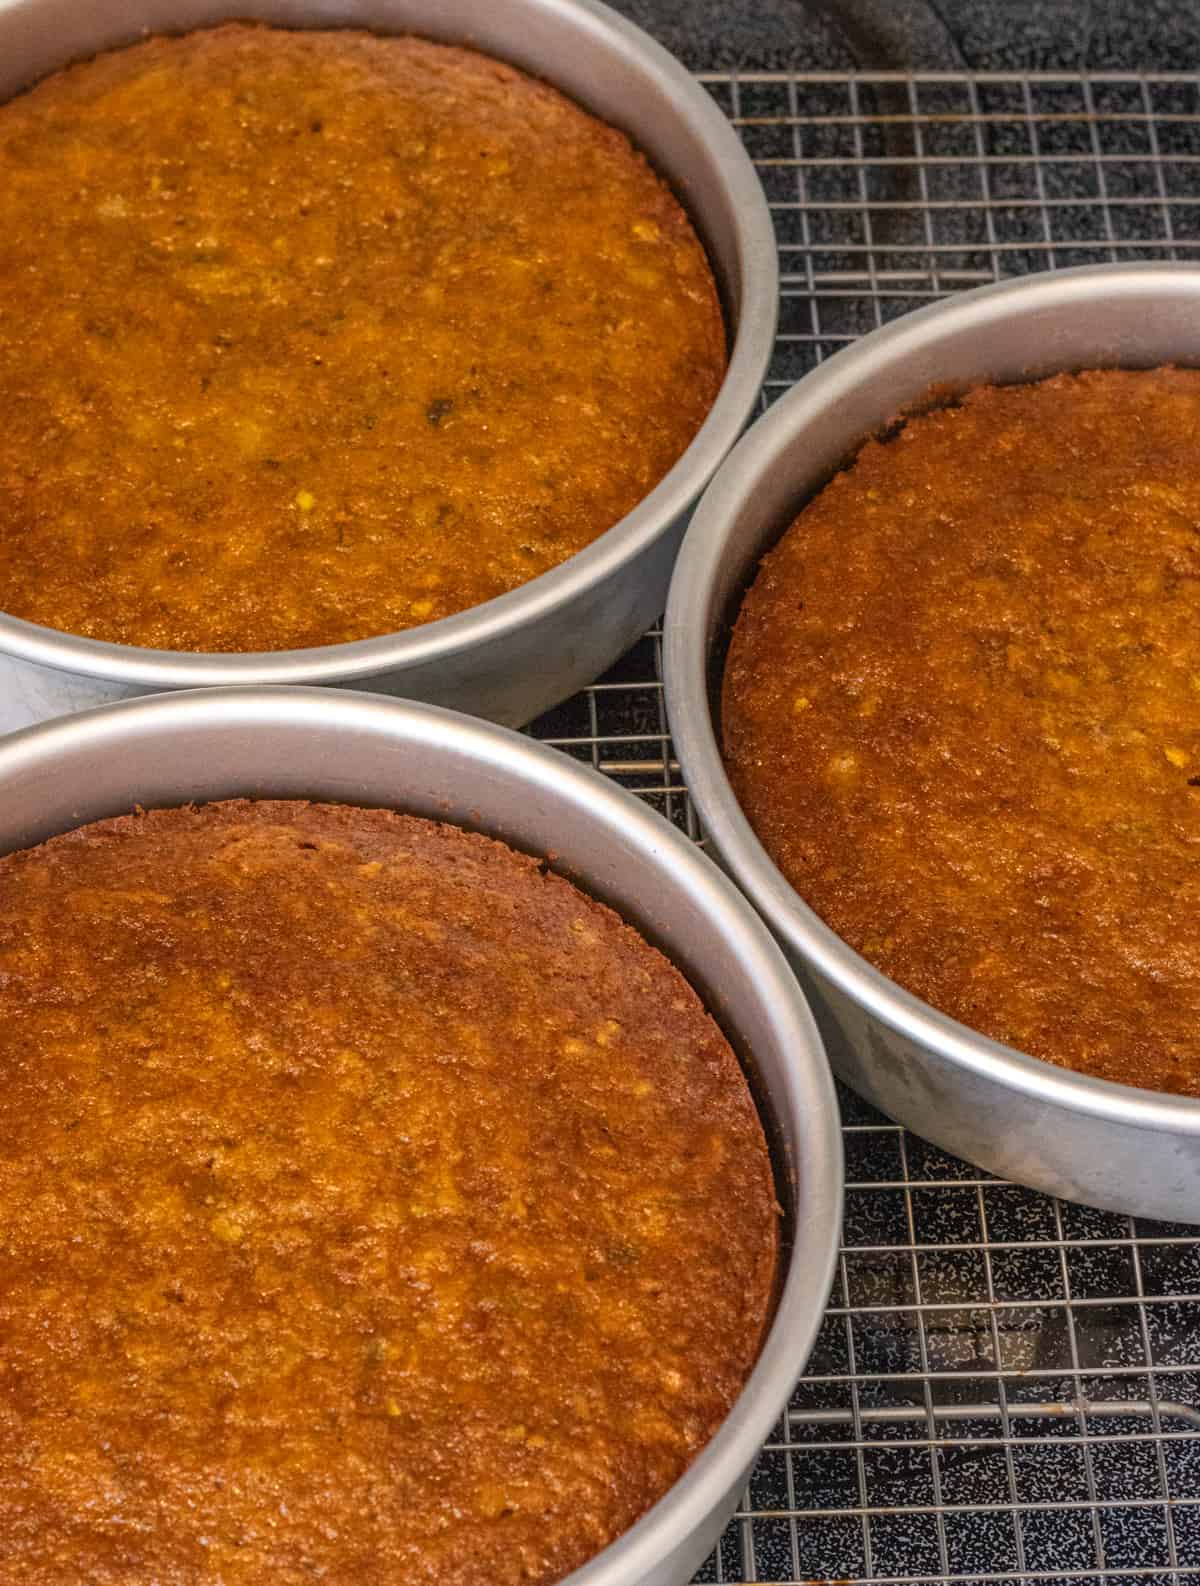 Carrot cakes cooling in their pans.